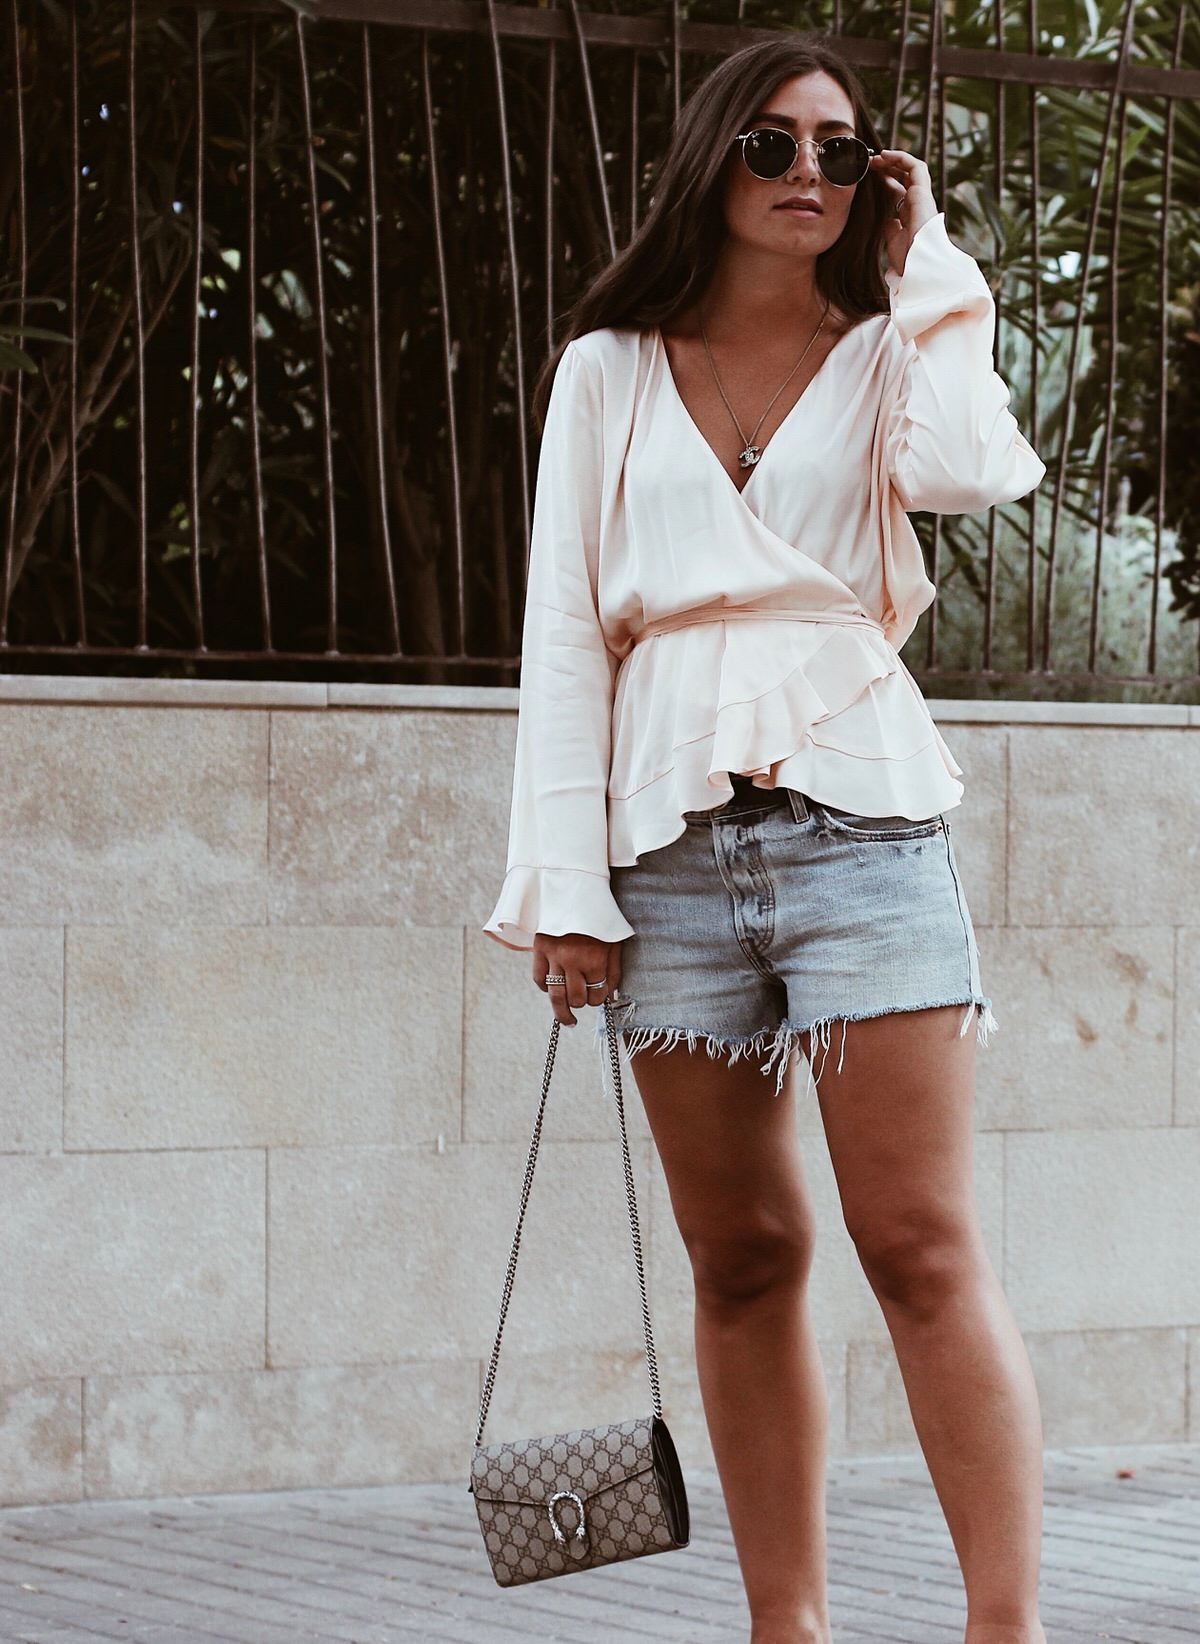 Sommer-Look: Uterque Seidenbluse, Levi's 501 Shorts, Hermes 'Oran' Sandalen & Gucci Dionysus, Mallorca, Outfit, Summer, Streetstyle, Ray Ban, Round Metal, Gucci Gürtel